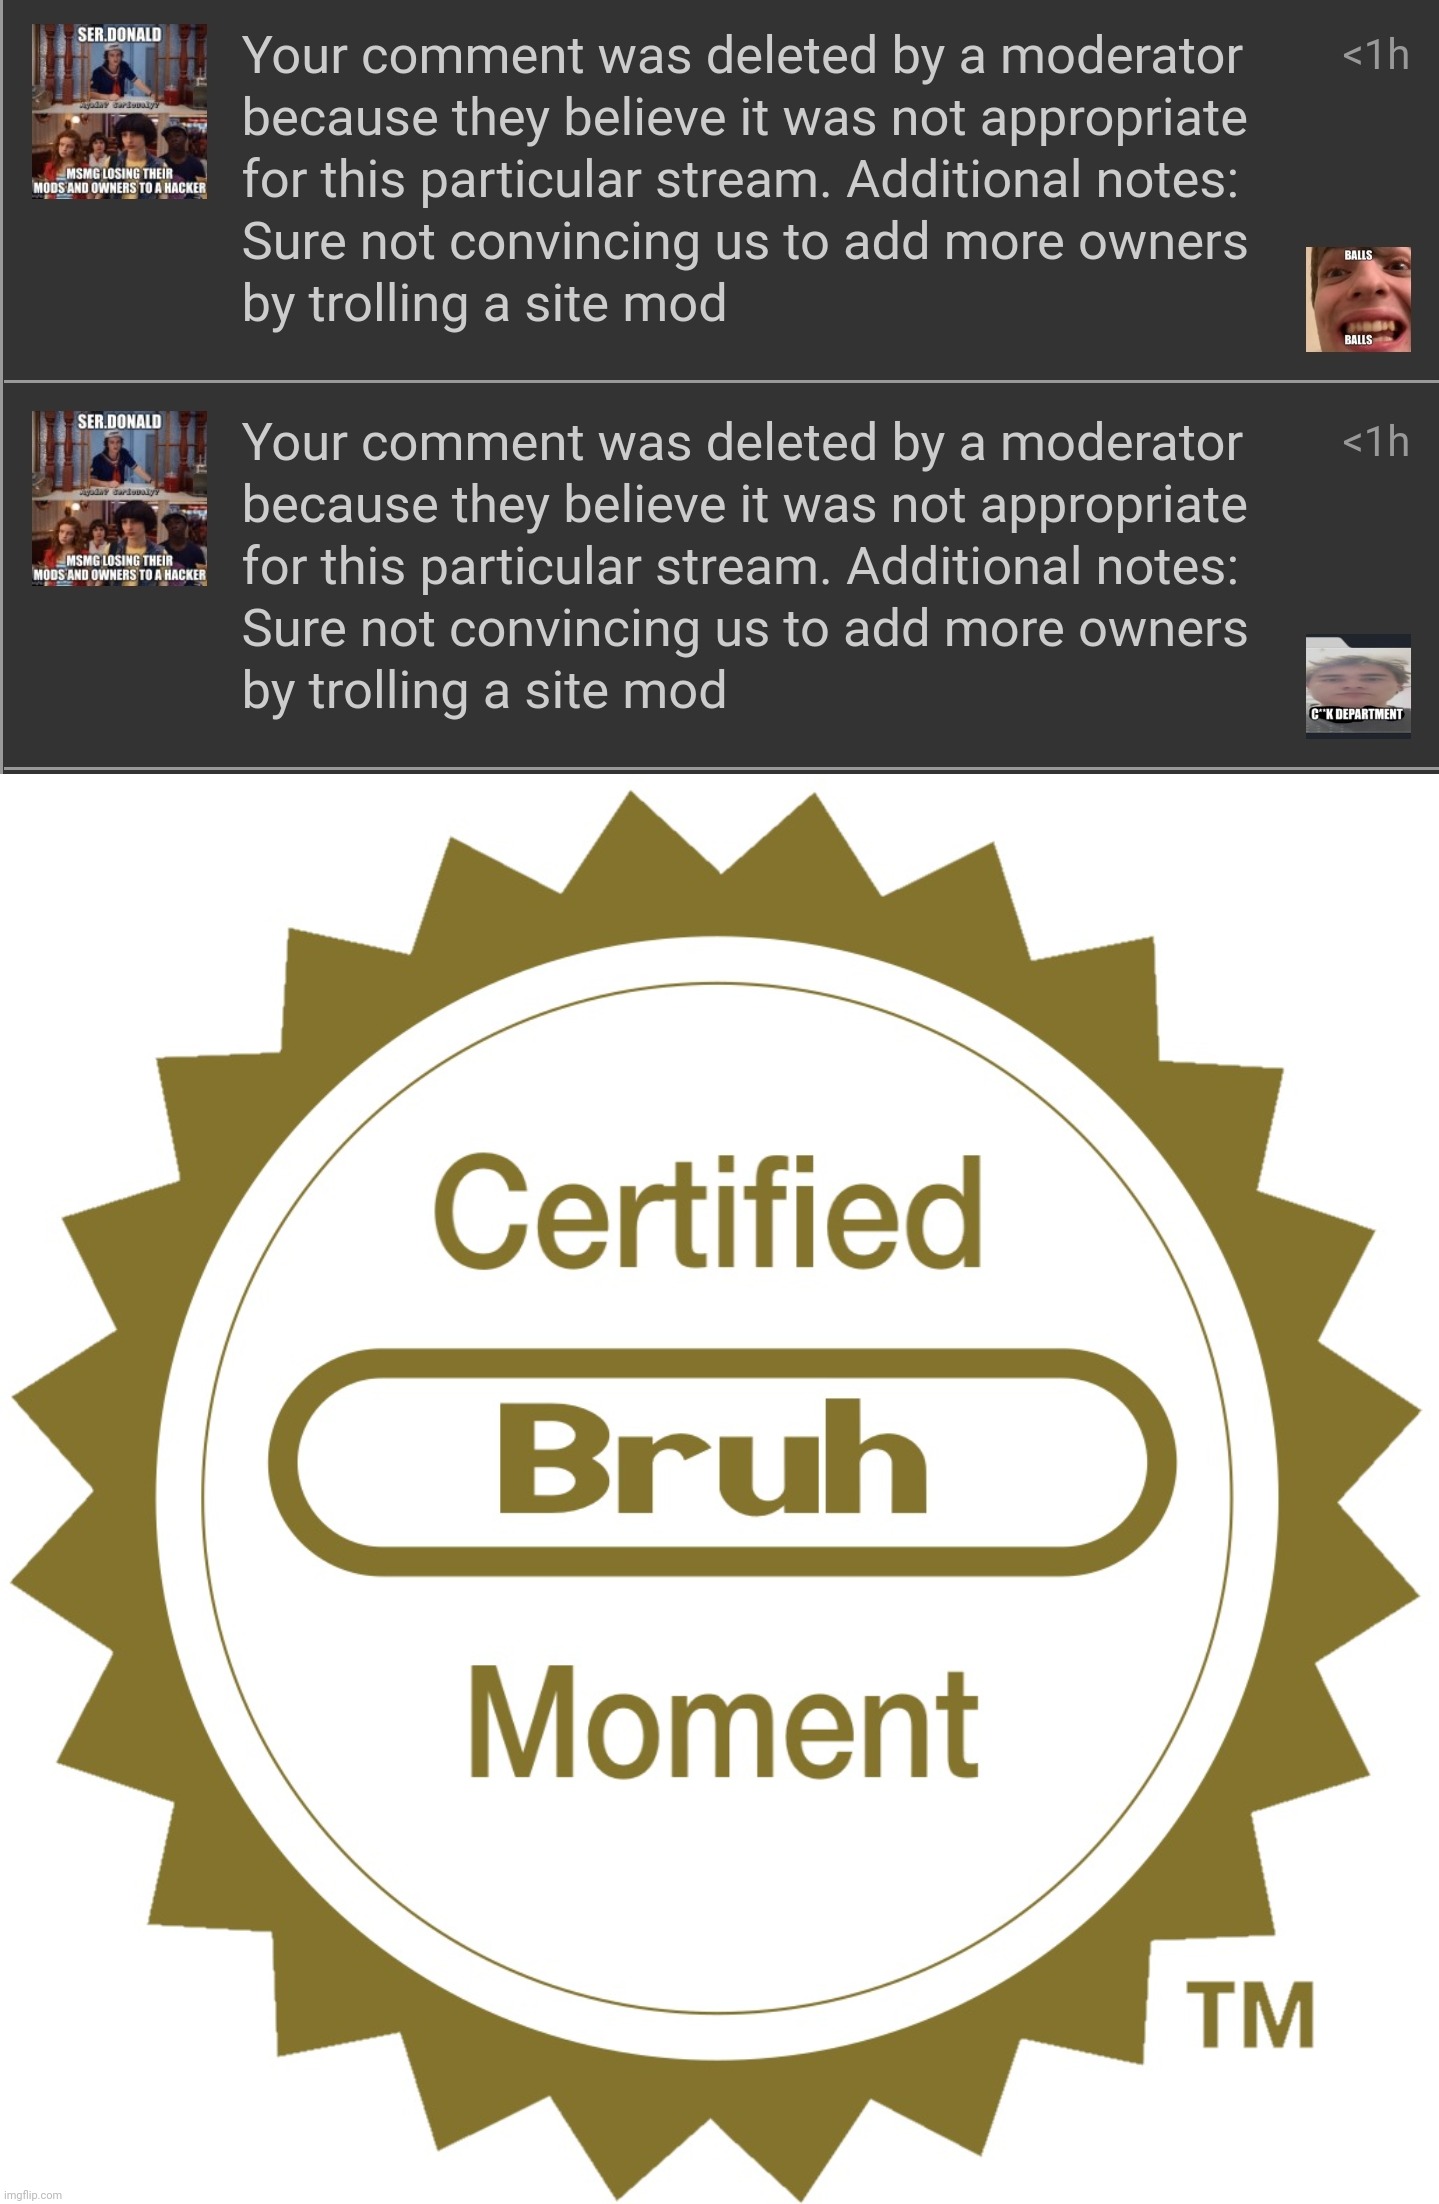 Goddаmn site mods... | image tagged in certified bruh moment,site mods,deleted comments,imgflip,memes | made w/ Imgflip meme maker